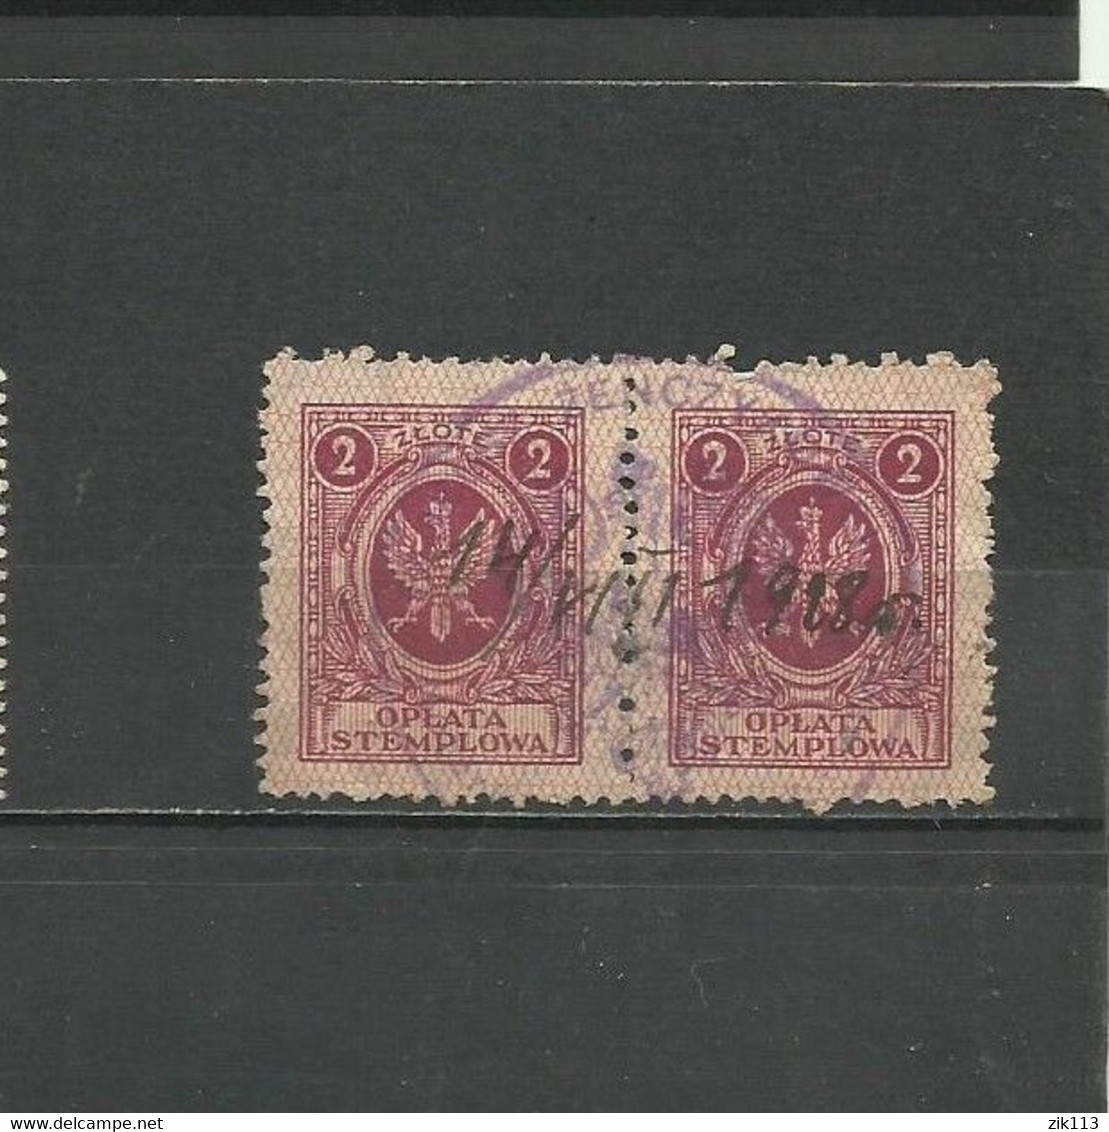 Poland 1928 - A Pair Of Stamps, Revenue, Used - Revenue Stamps